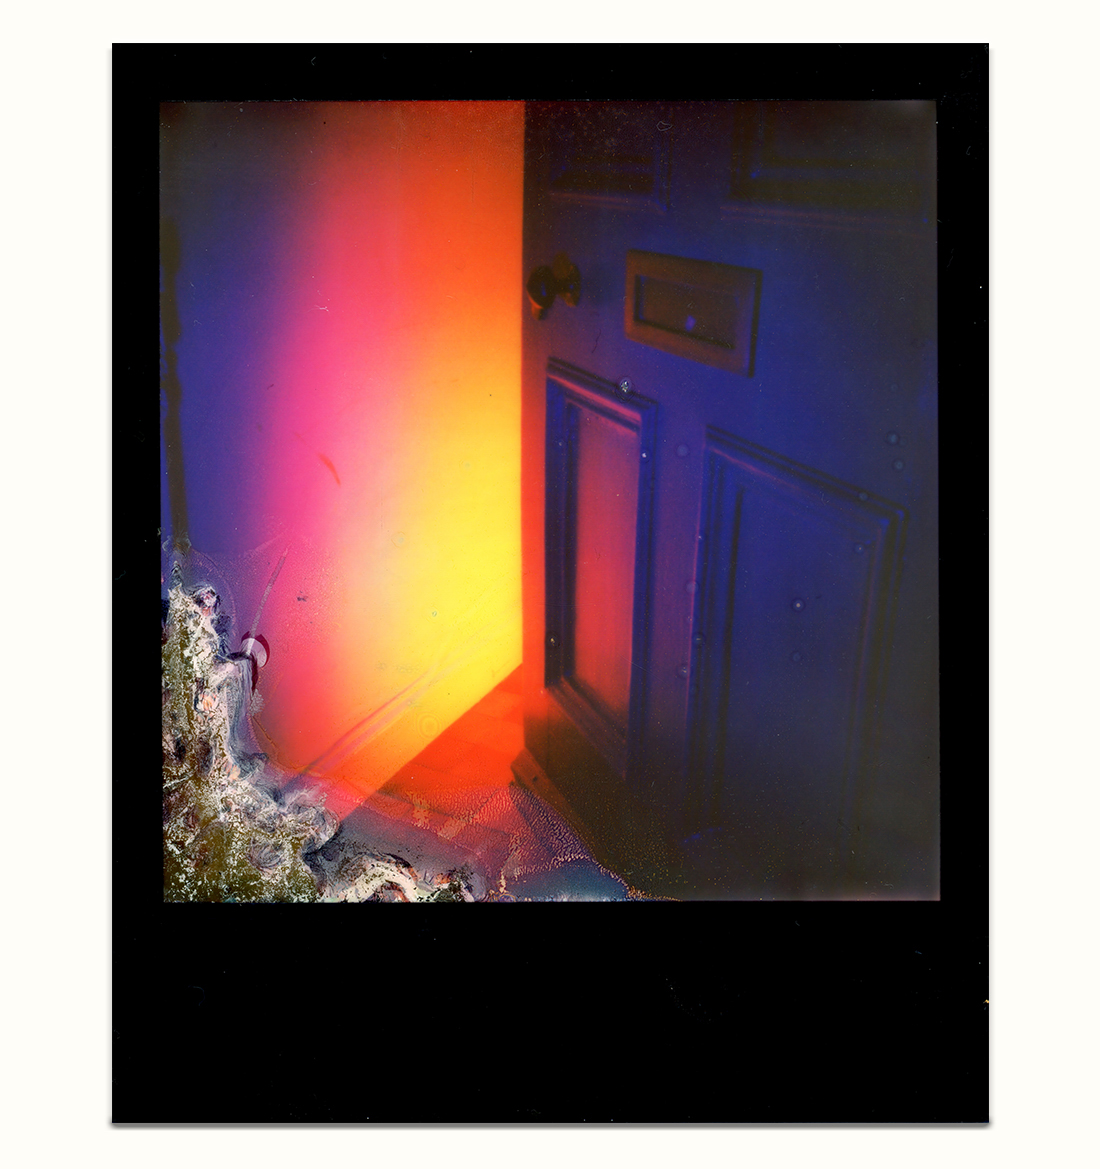 A scan of a black frame i-type Polaroid of A partially open purple door with amber yellow light radiating outwards from inside the home with a chemical burn in the lower left corner on a white background.